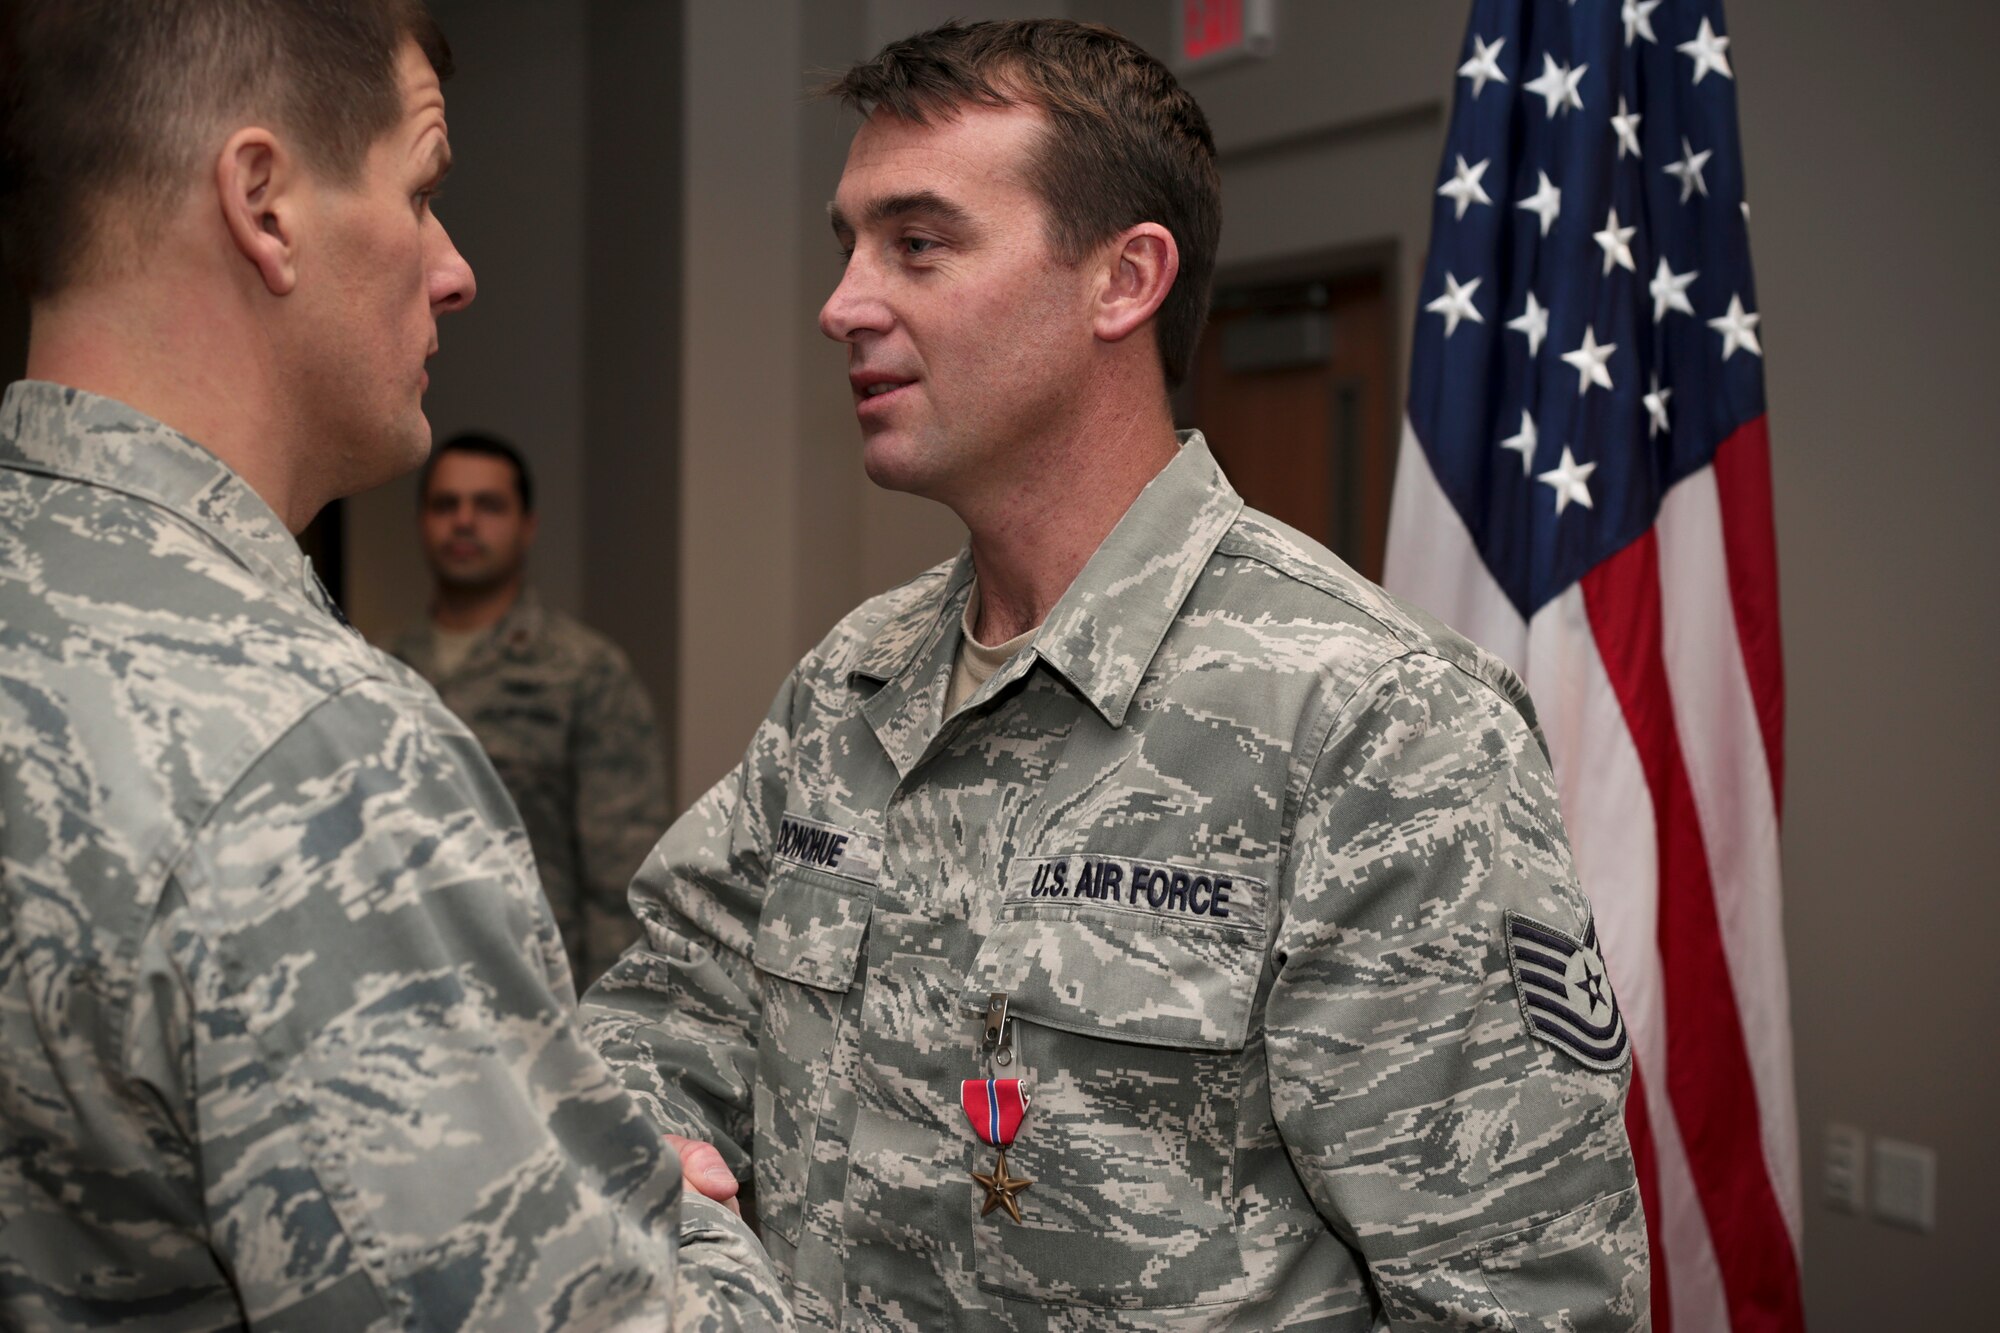 A picture of U.S. Air Force Tech. Sgt. Christopher Donohue being congratulated by Col. Kerry M. Gentry, commander of the 177th Fighter Wing, after receiving the Bronze Star Medal.